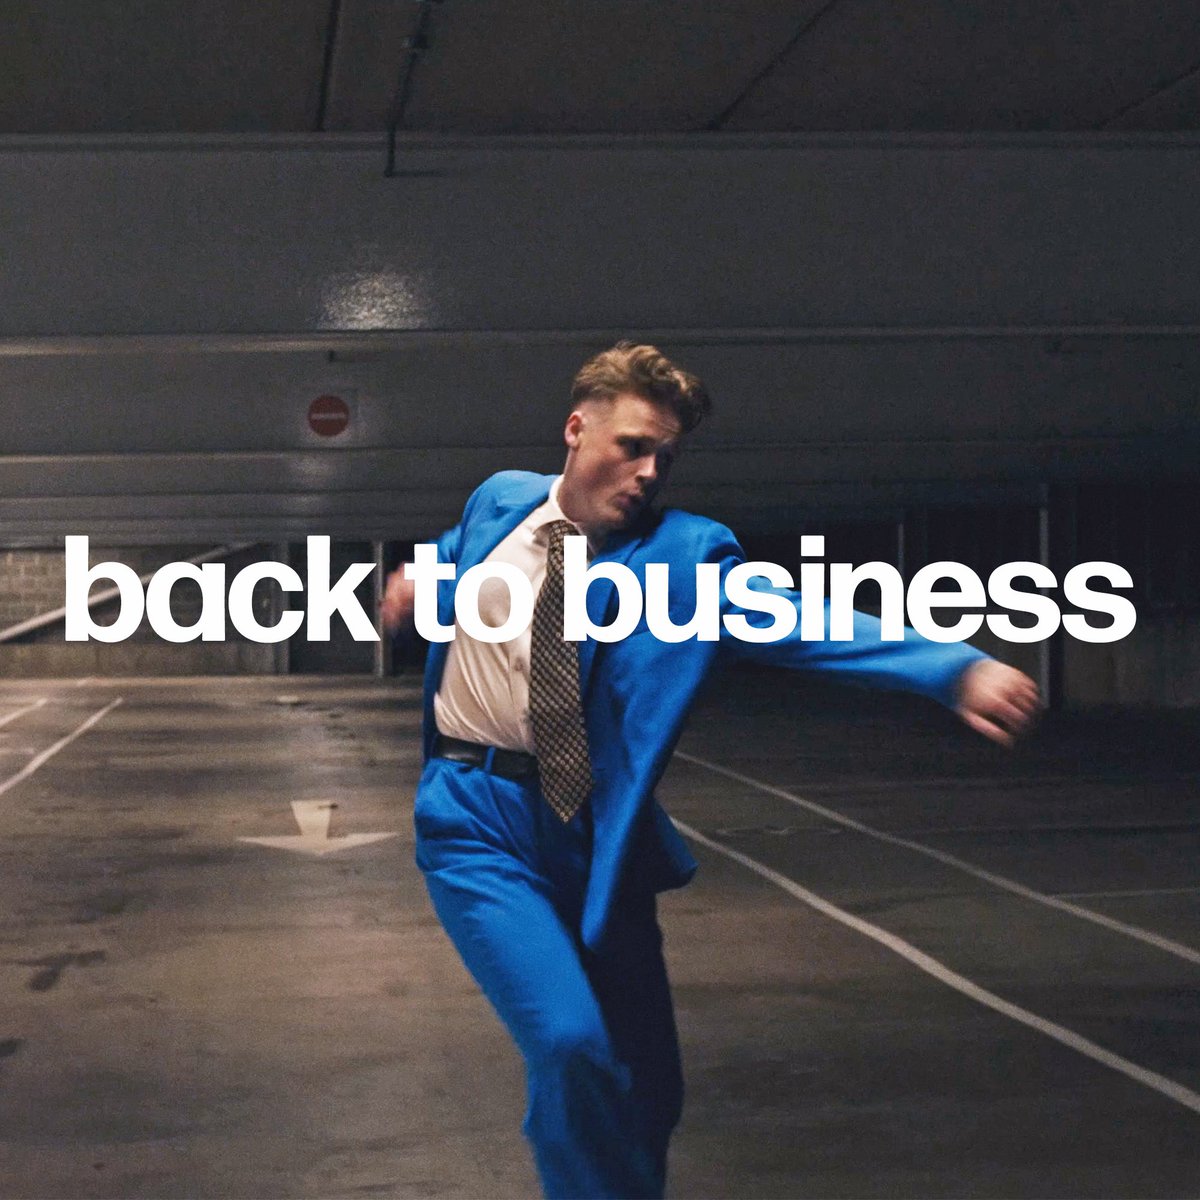 Our brand new single ‘Back to Business’ comes out this Friday 😭🙏❤️ Pre-save here: found.ee/thebigday_back…